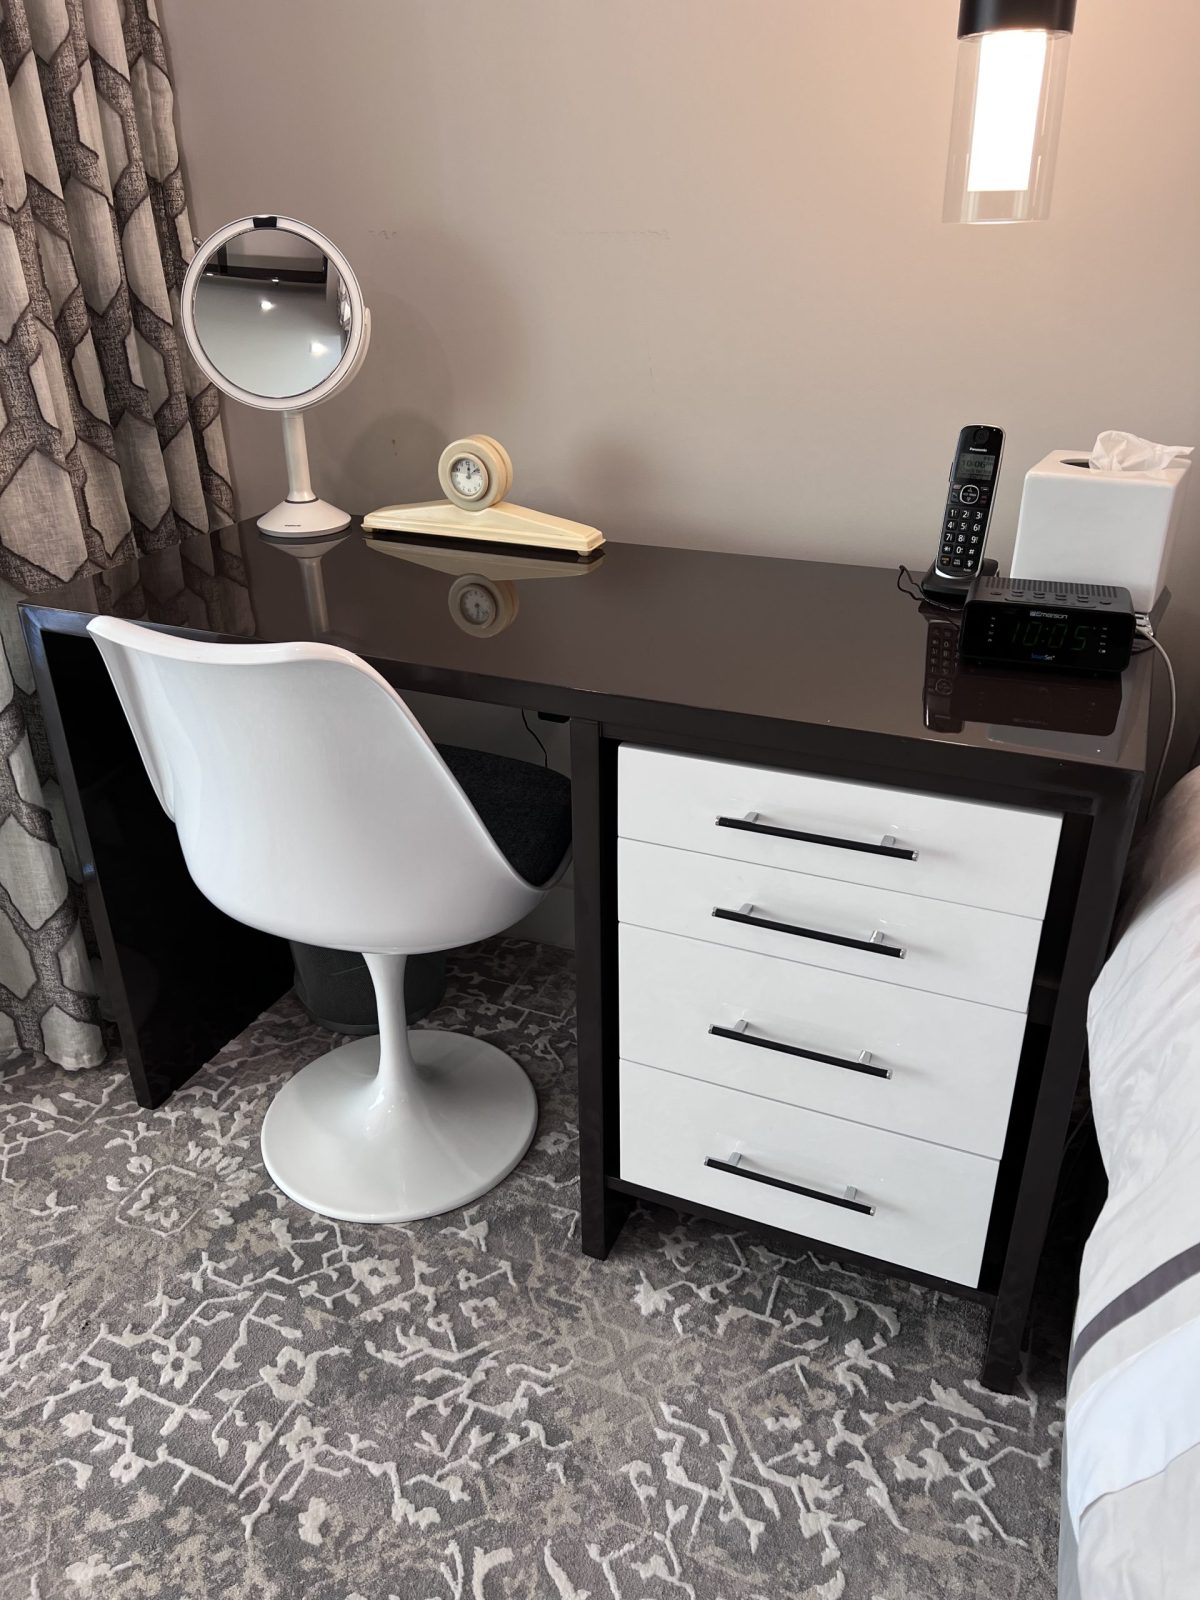 custom design black and white desk to match with bedroom set